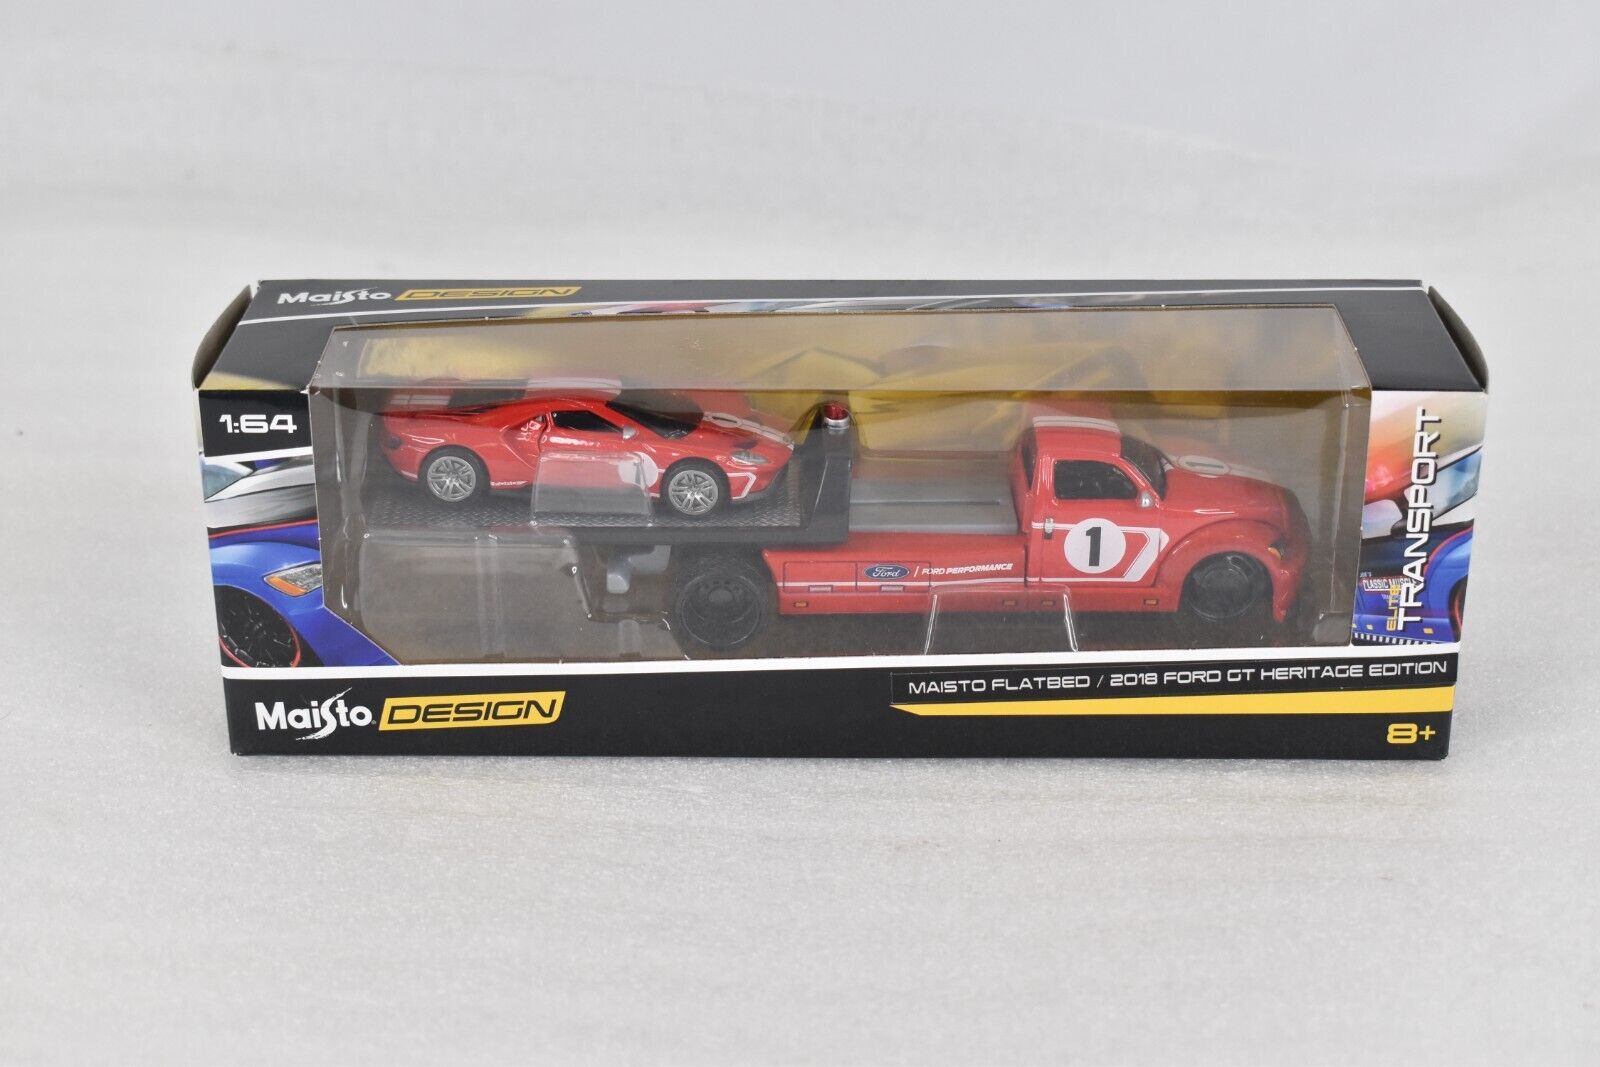 MAISTO DESIGN FLATBED 2018 FORD GT HERITAGE EDITION 1:64 ScaleT46